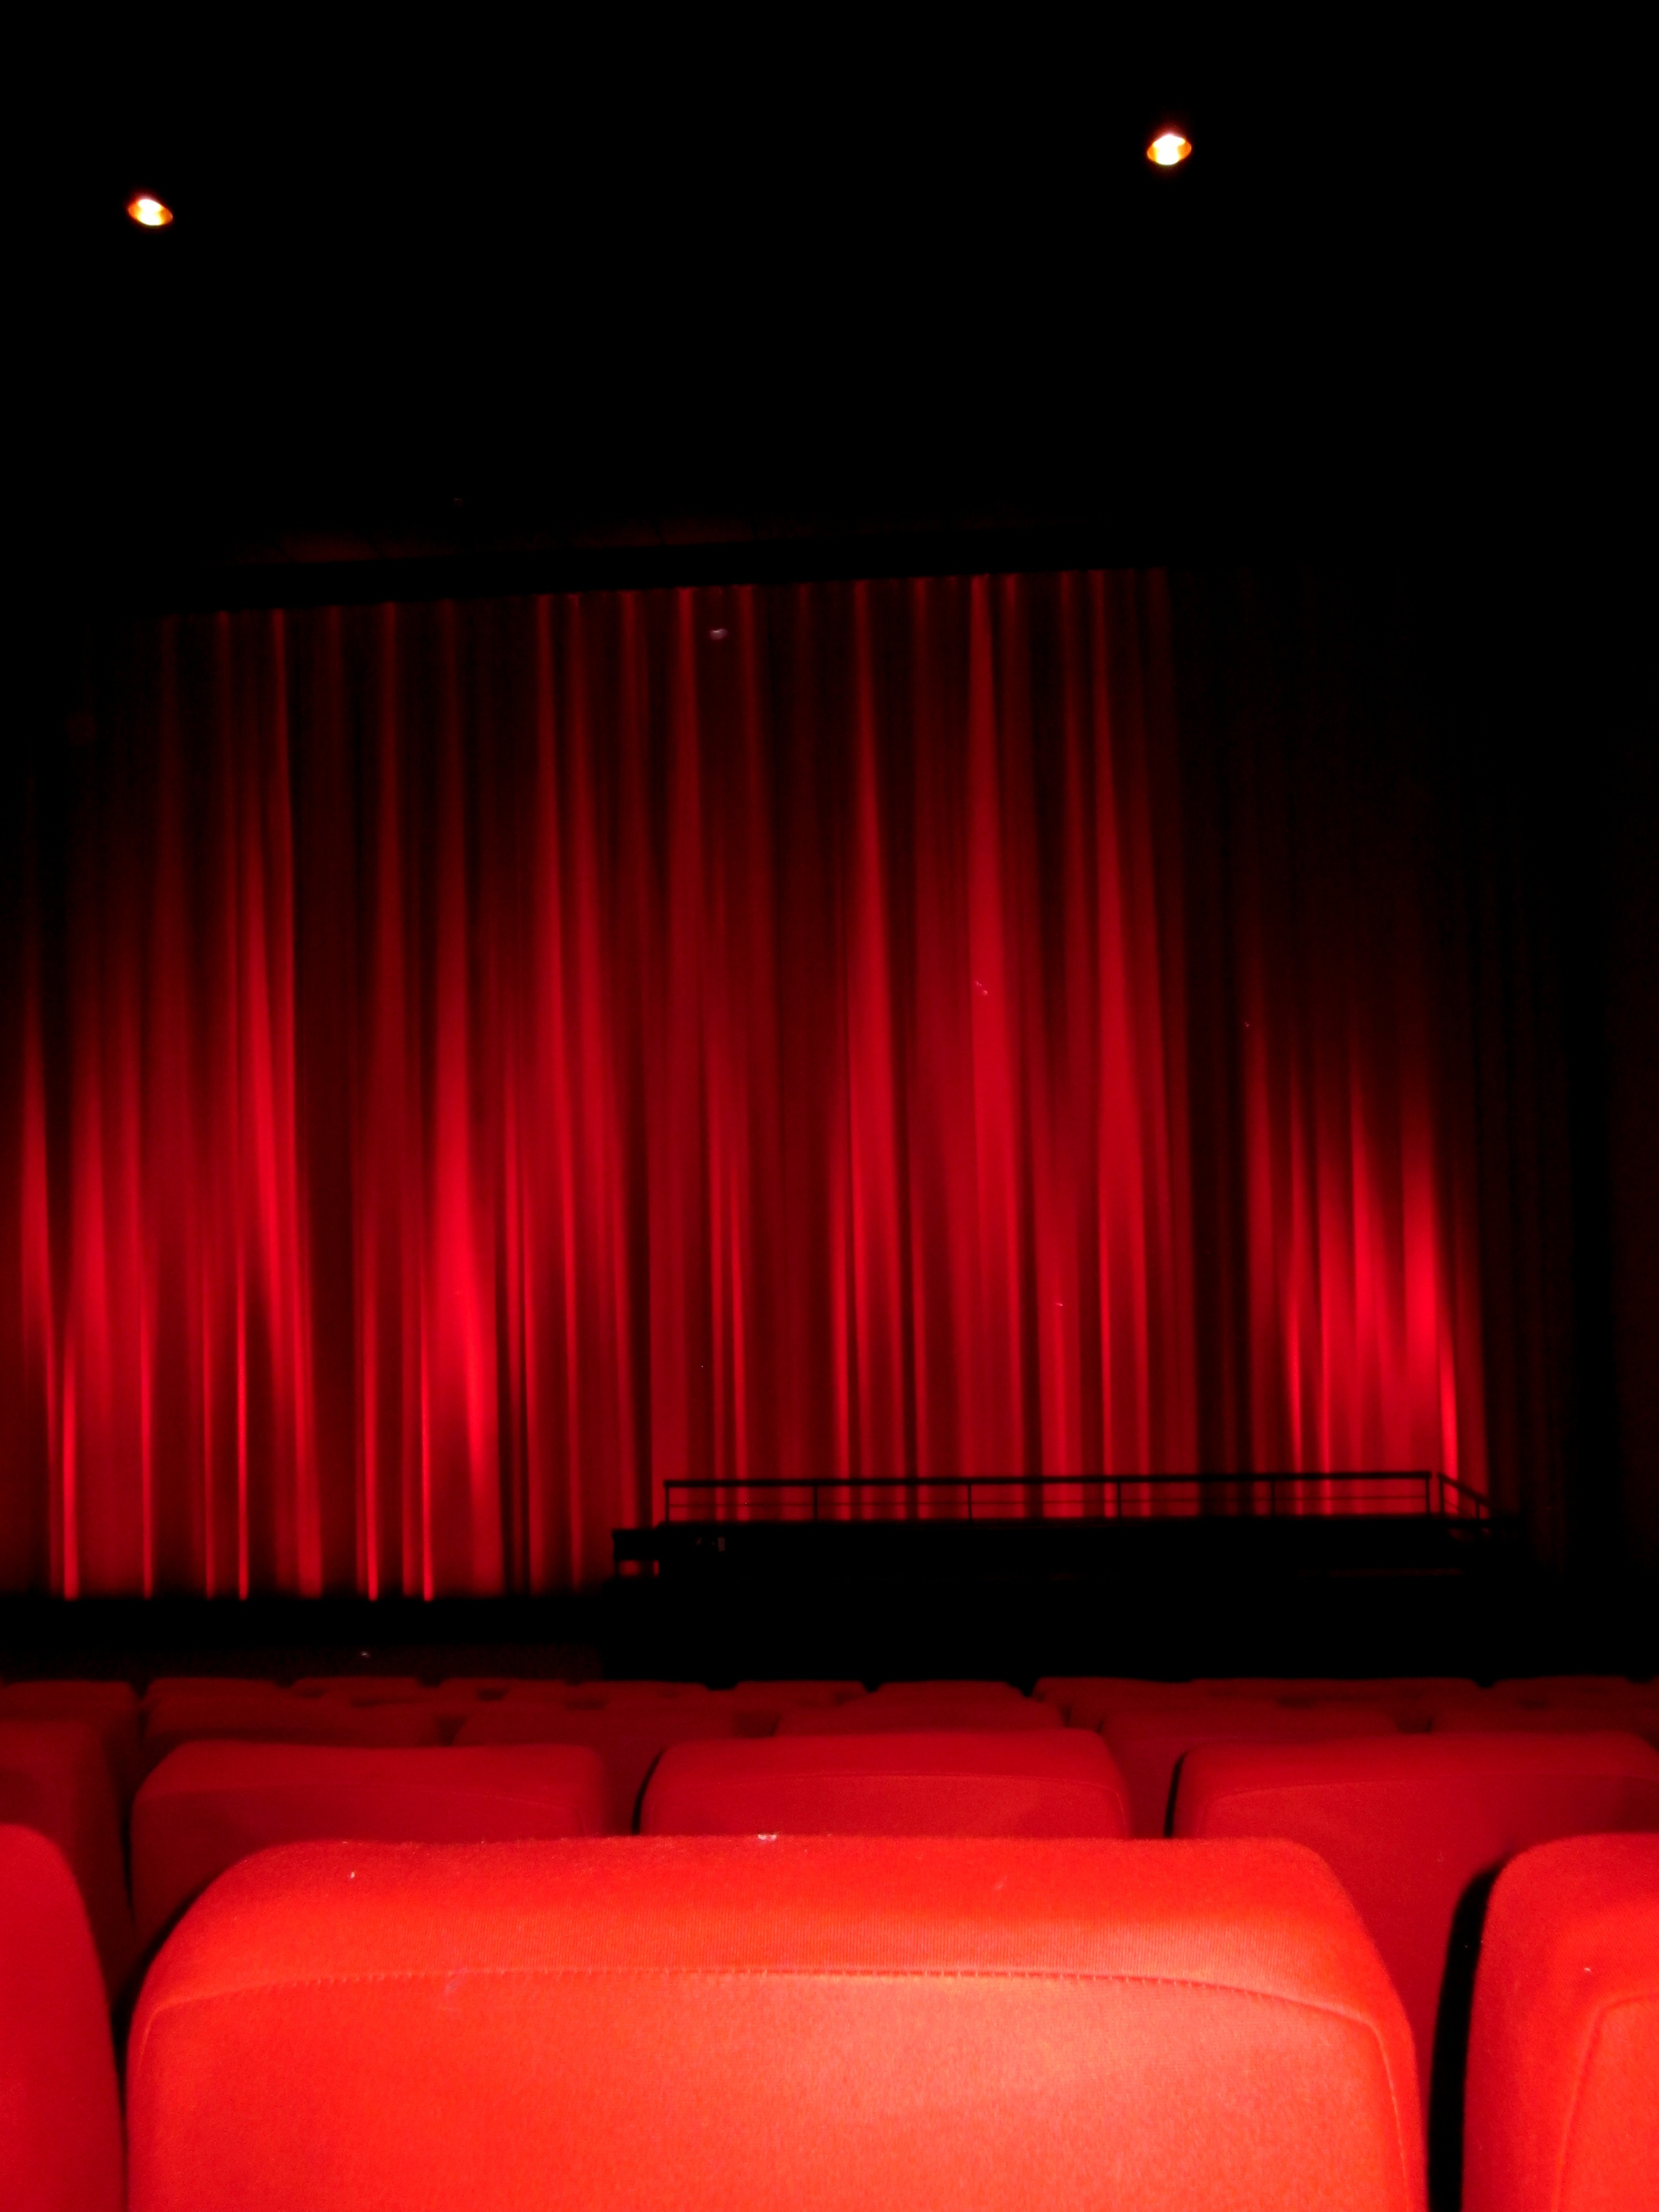 Free Image, light, auditorium, red, romance, romantic, black, leisure, theatre, stage, performance, demonstration, entertainment, hobby, going out, film festival, movie theater, cinema fan, cinema seating, cinema hall, cinema lovers, movie goers